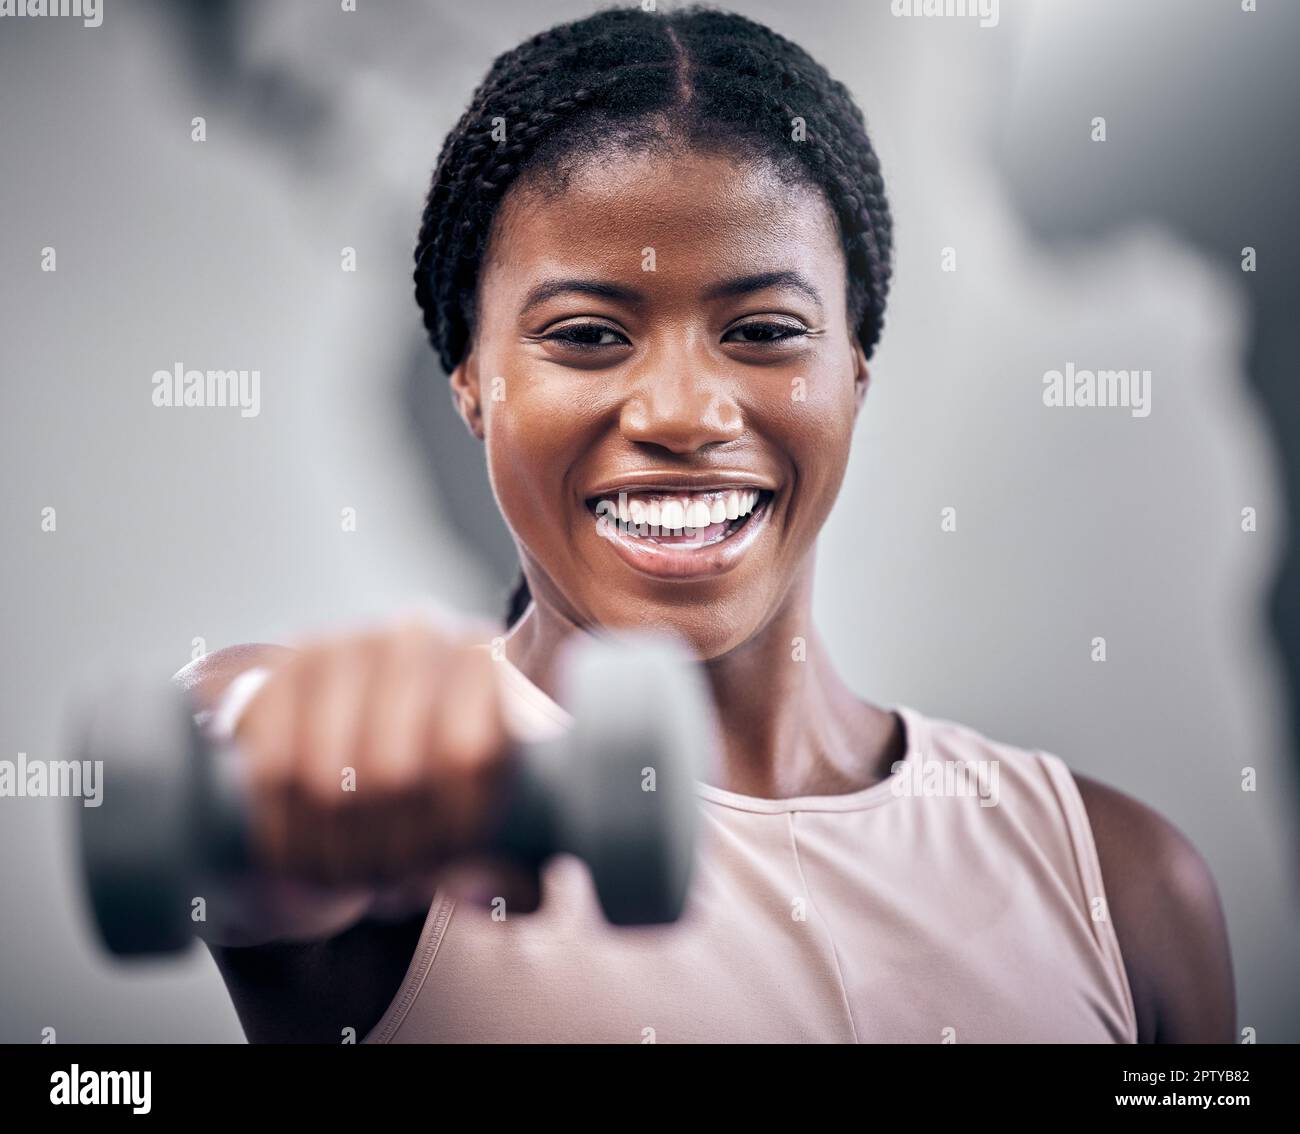 Dumbbell, fitness and black woman in portrait for muscle, power